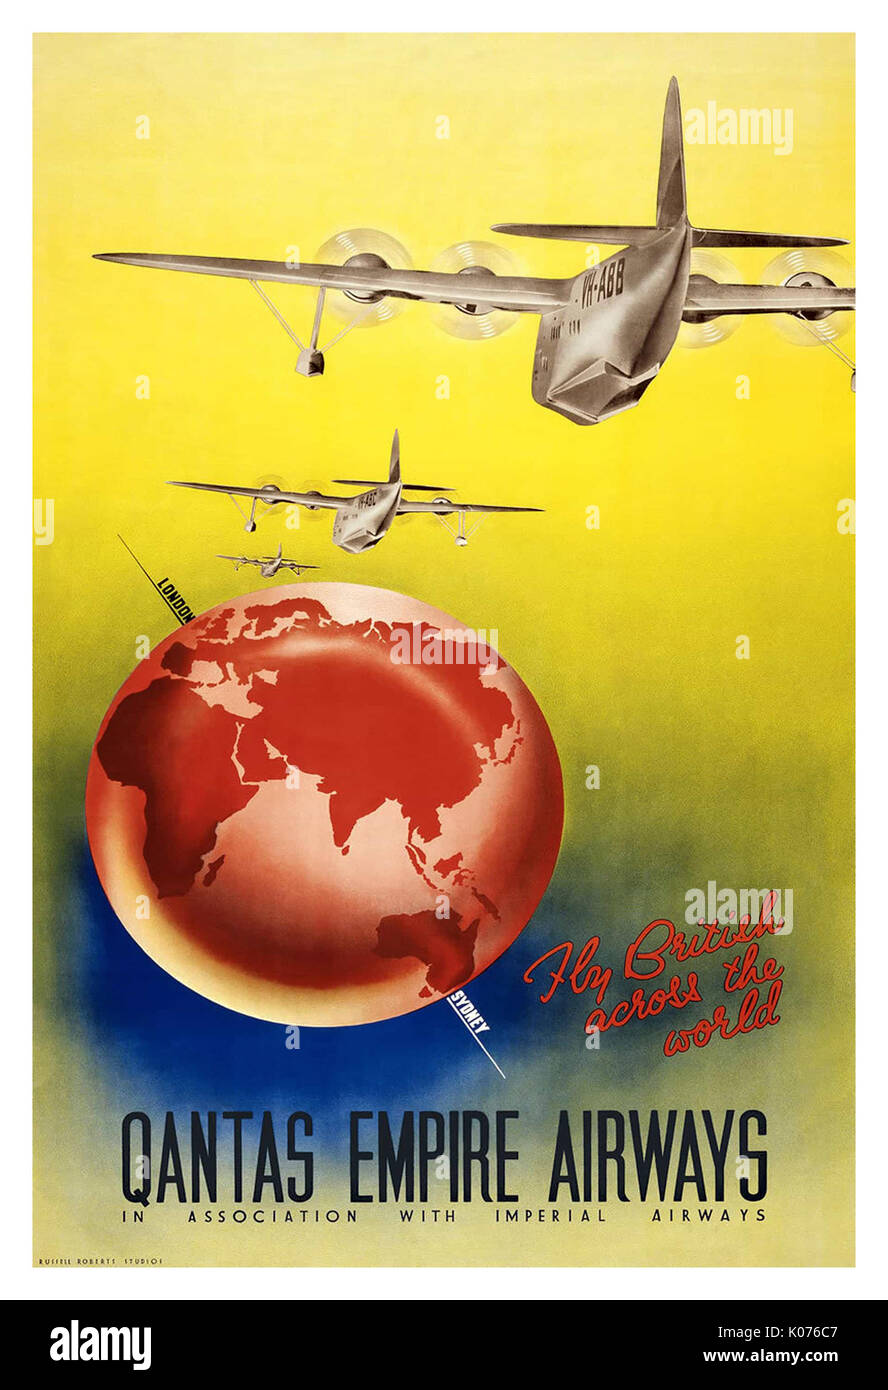 1930's Vintage Travel Poster 'Qantas Empire Airways' - London/Sydney by Flying-Boat. Stock Photo